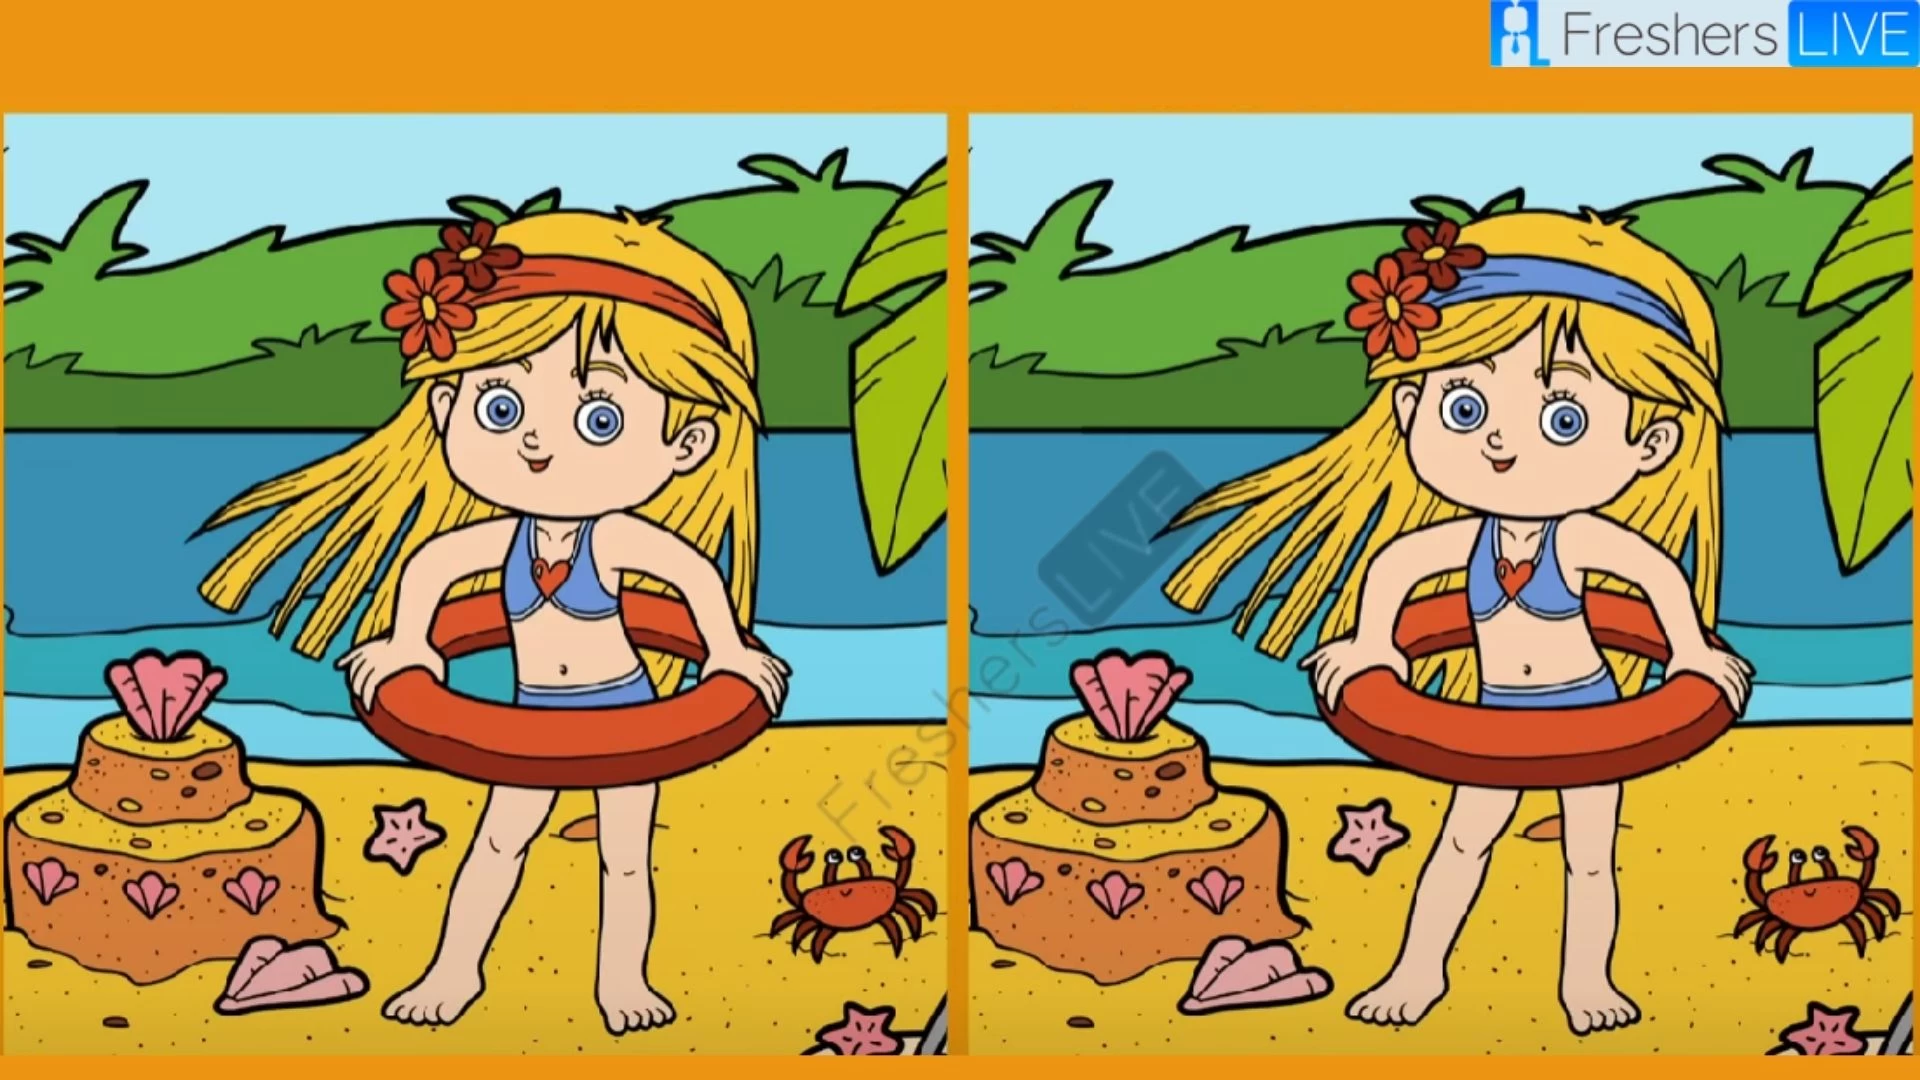 Spot 3 differences between the two cute girl pictures in 10 seconds!